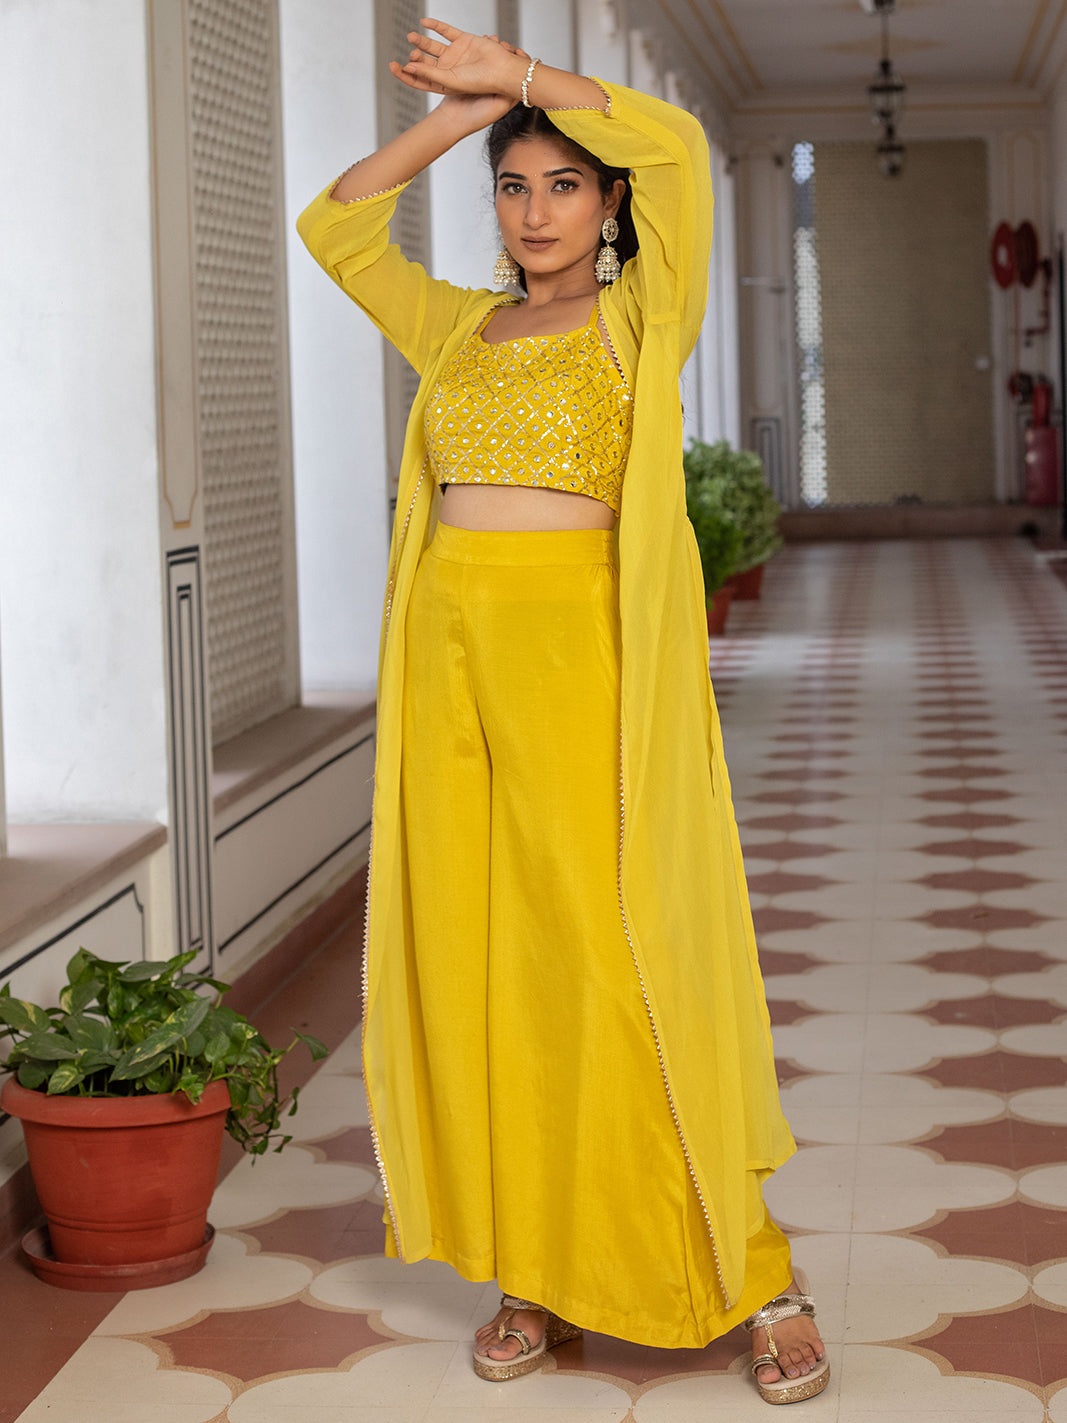 dazzle-in-our-mustard-yellow-co-ord-set-adorned-with-captivating-mirror-work-a-vibrant-ensemble-thats-a-perfect-blend-of-tradition-and-trend